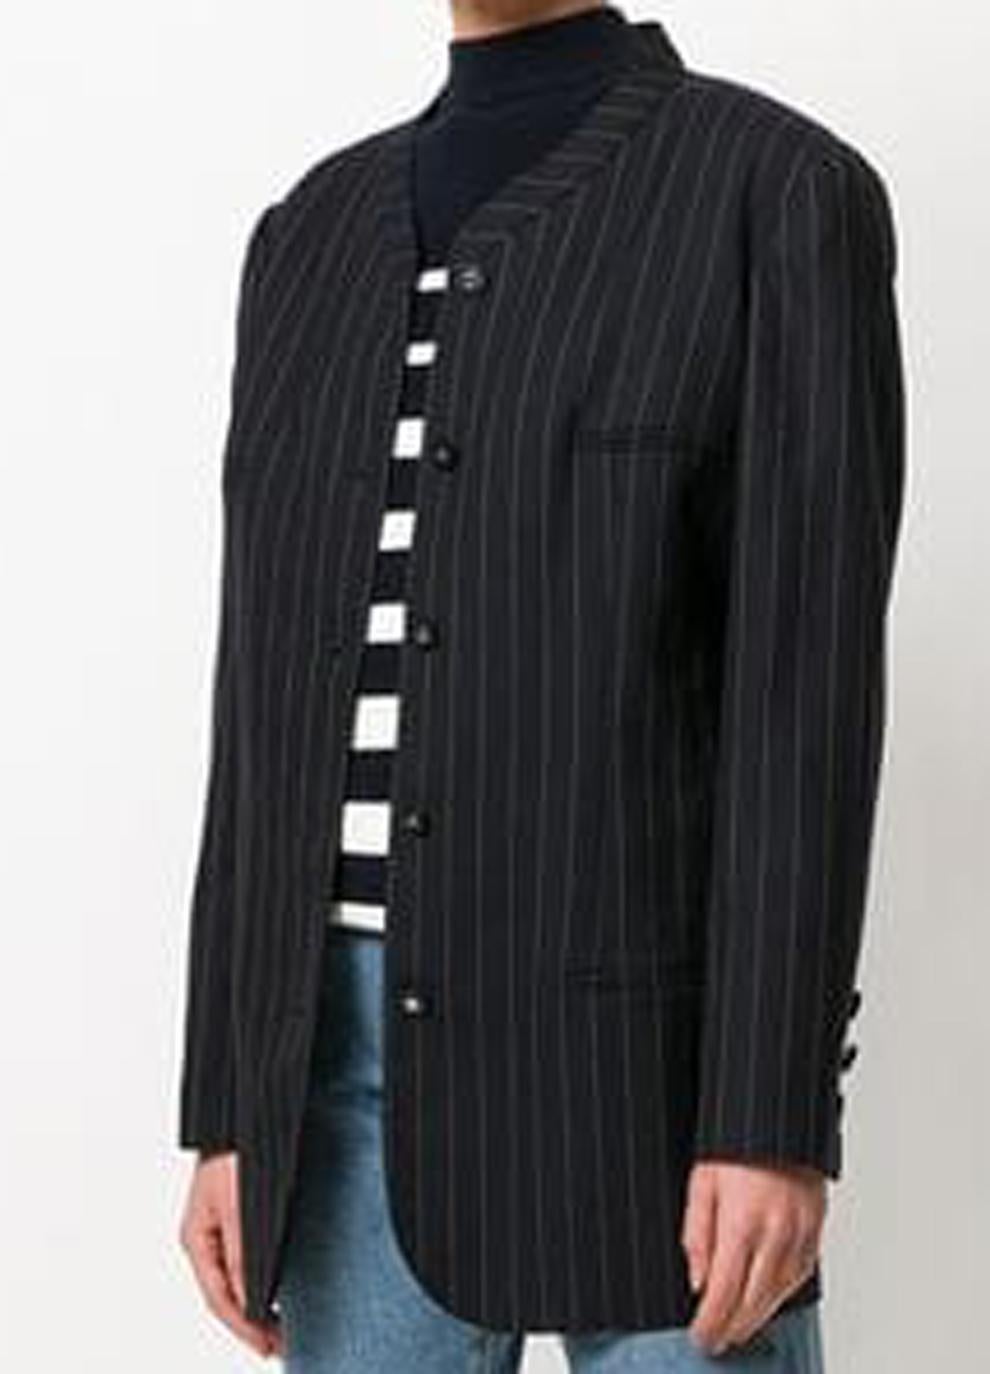 Black Chanel pinstripe long length jacket featuring a band collar, a front button fastening, long sleeves, button cuffs, a full silk lining, a straight hem and CC logo buttons. 
Composition: 100% wool
In excellent vintage condition. Made in